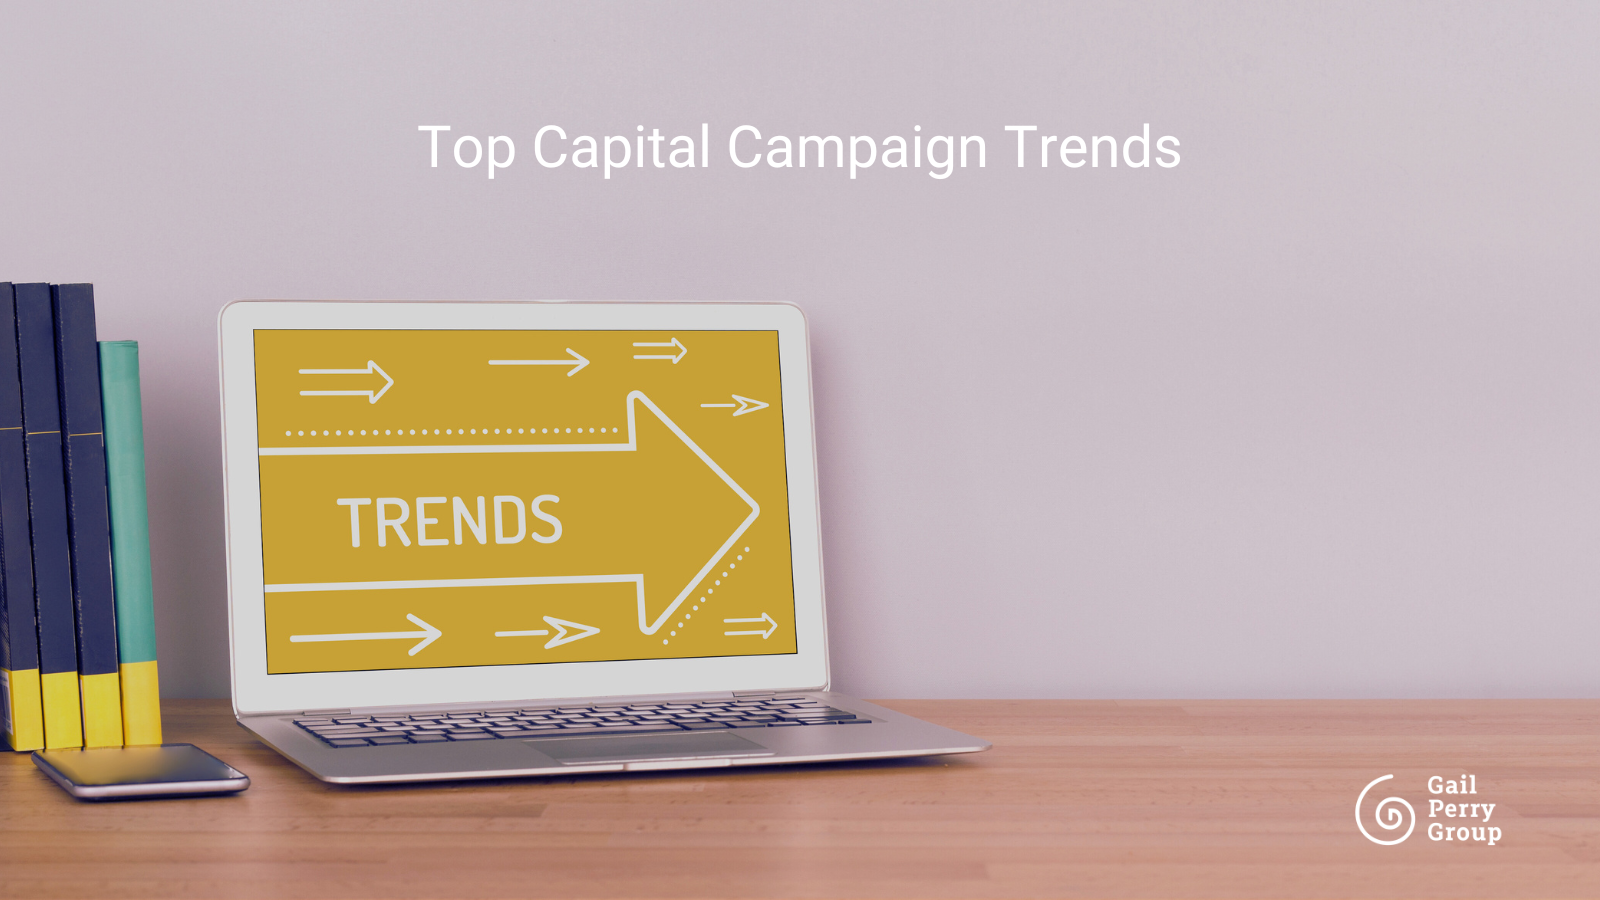 Top Capital Campaign Trends (1)